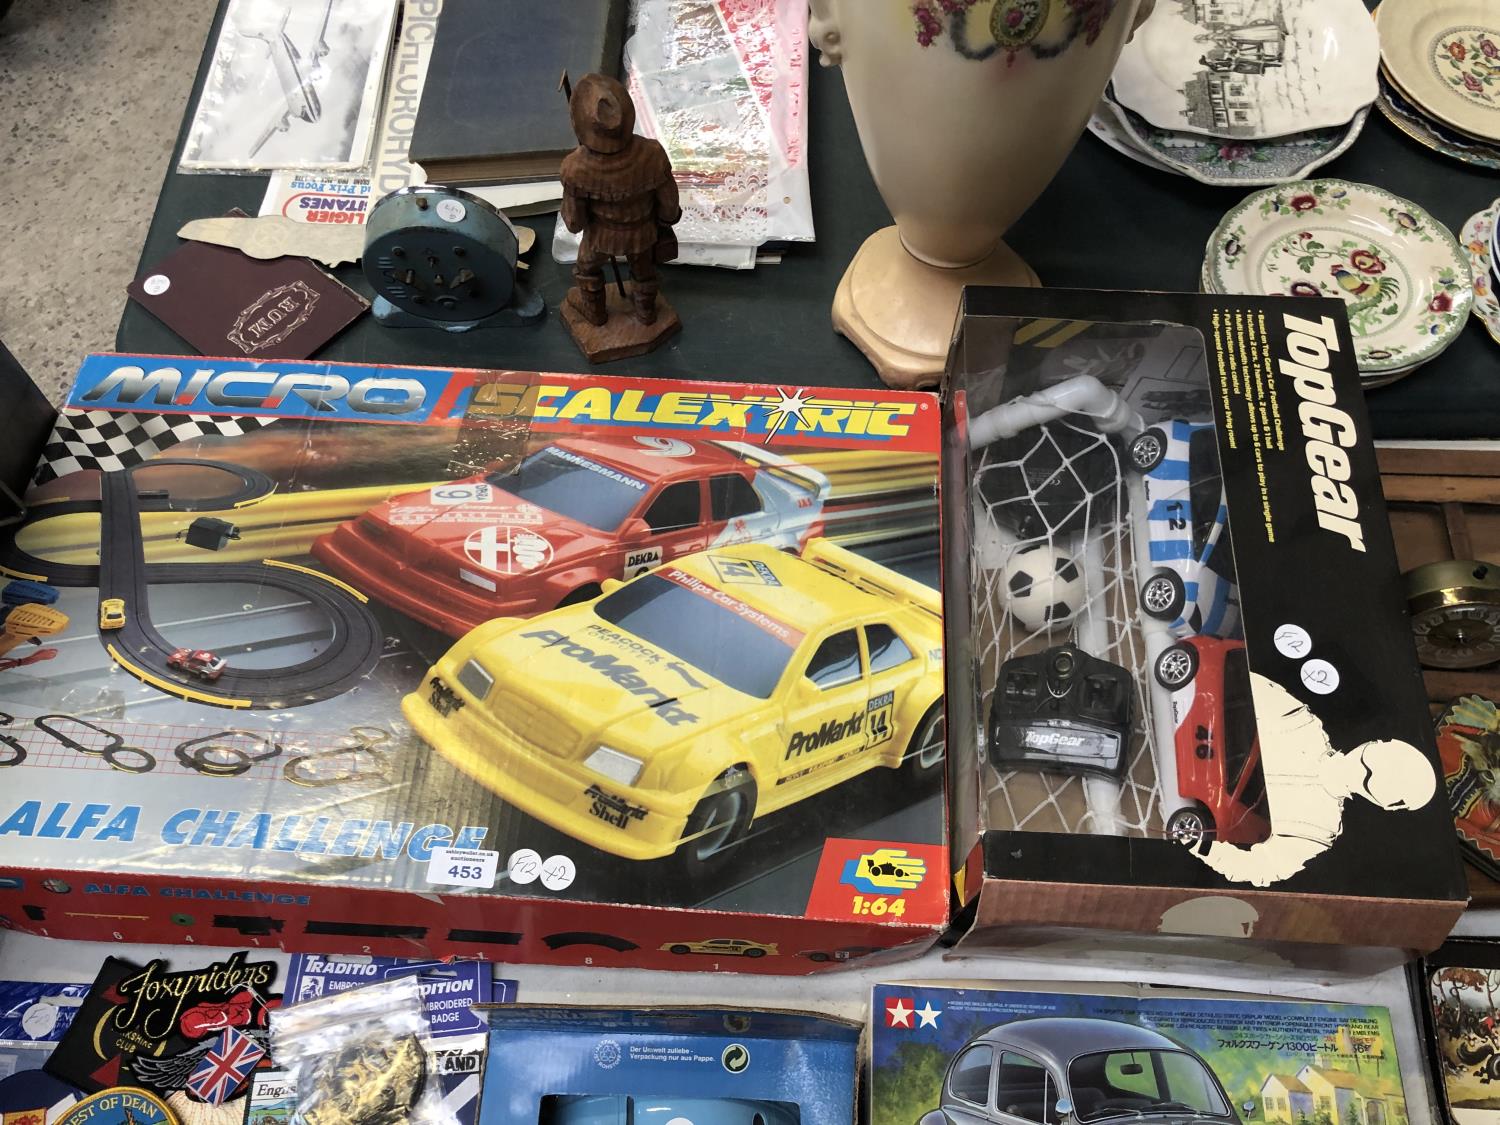 A BOXED ALFA CHALLENGE SCALEXTRIC GAME AND A BOXED 'TOP GEAR' SET (2)